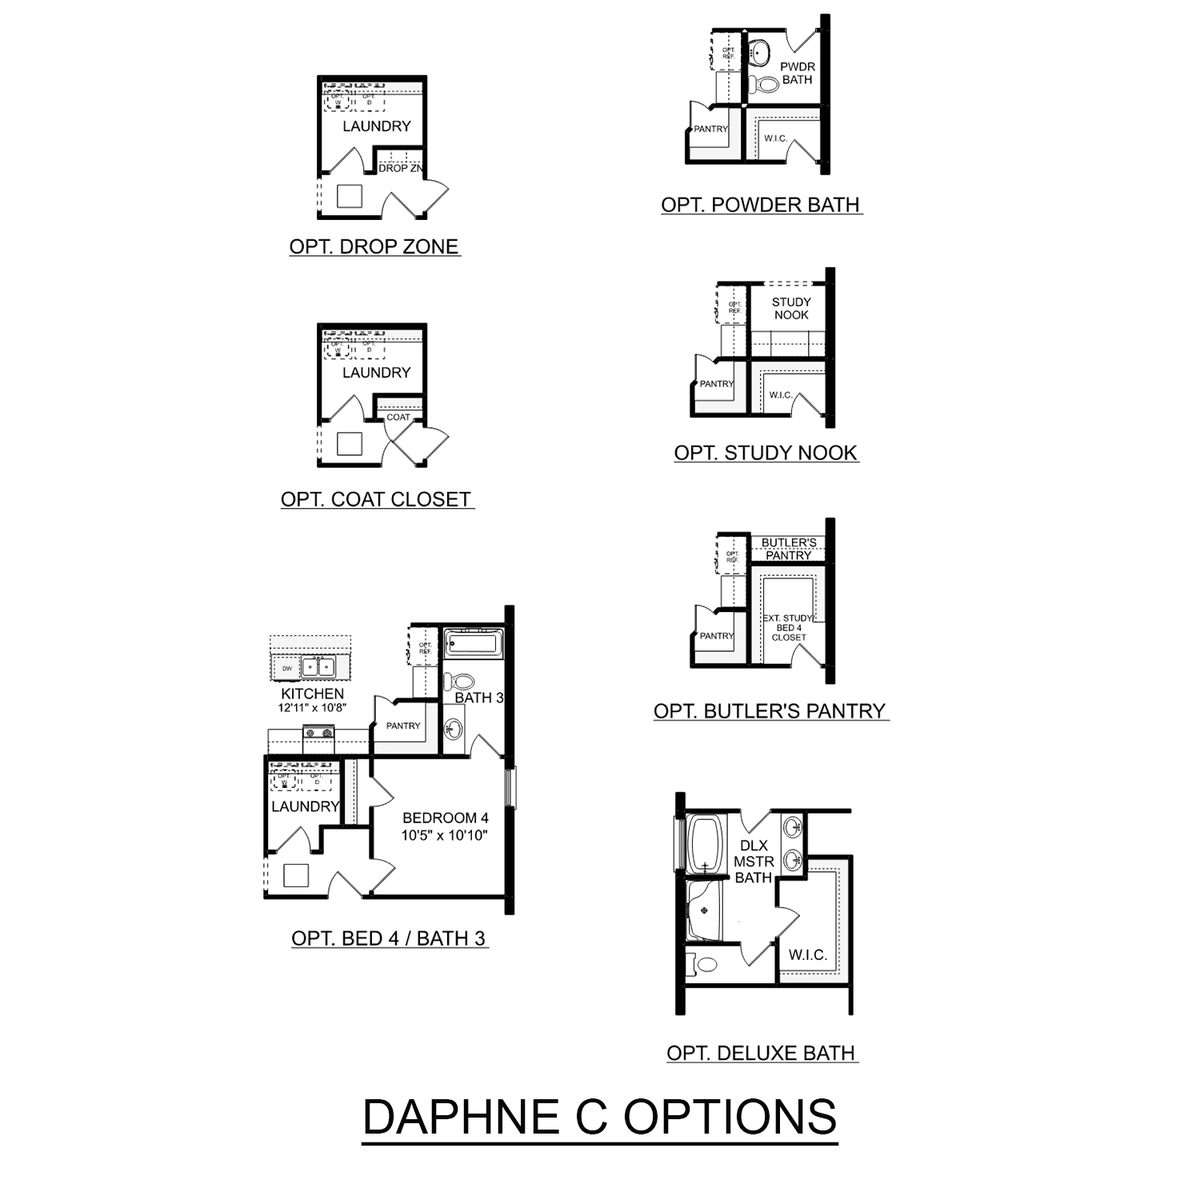 2 - The Daphne C floor plan layout for 112 Saylor Rose Drive in Davidson Homes' Heritage Lakes community.